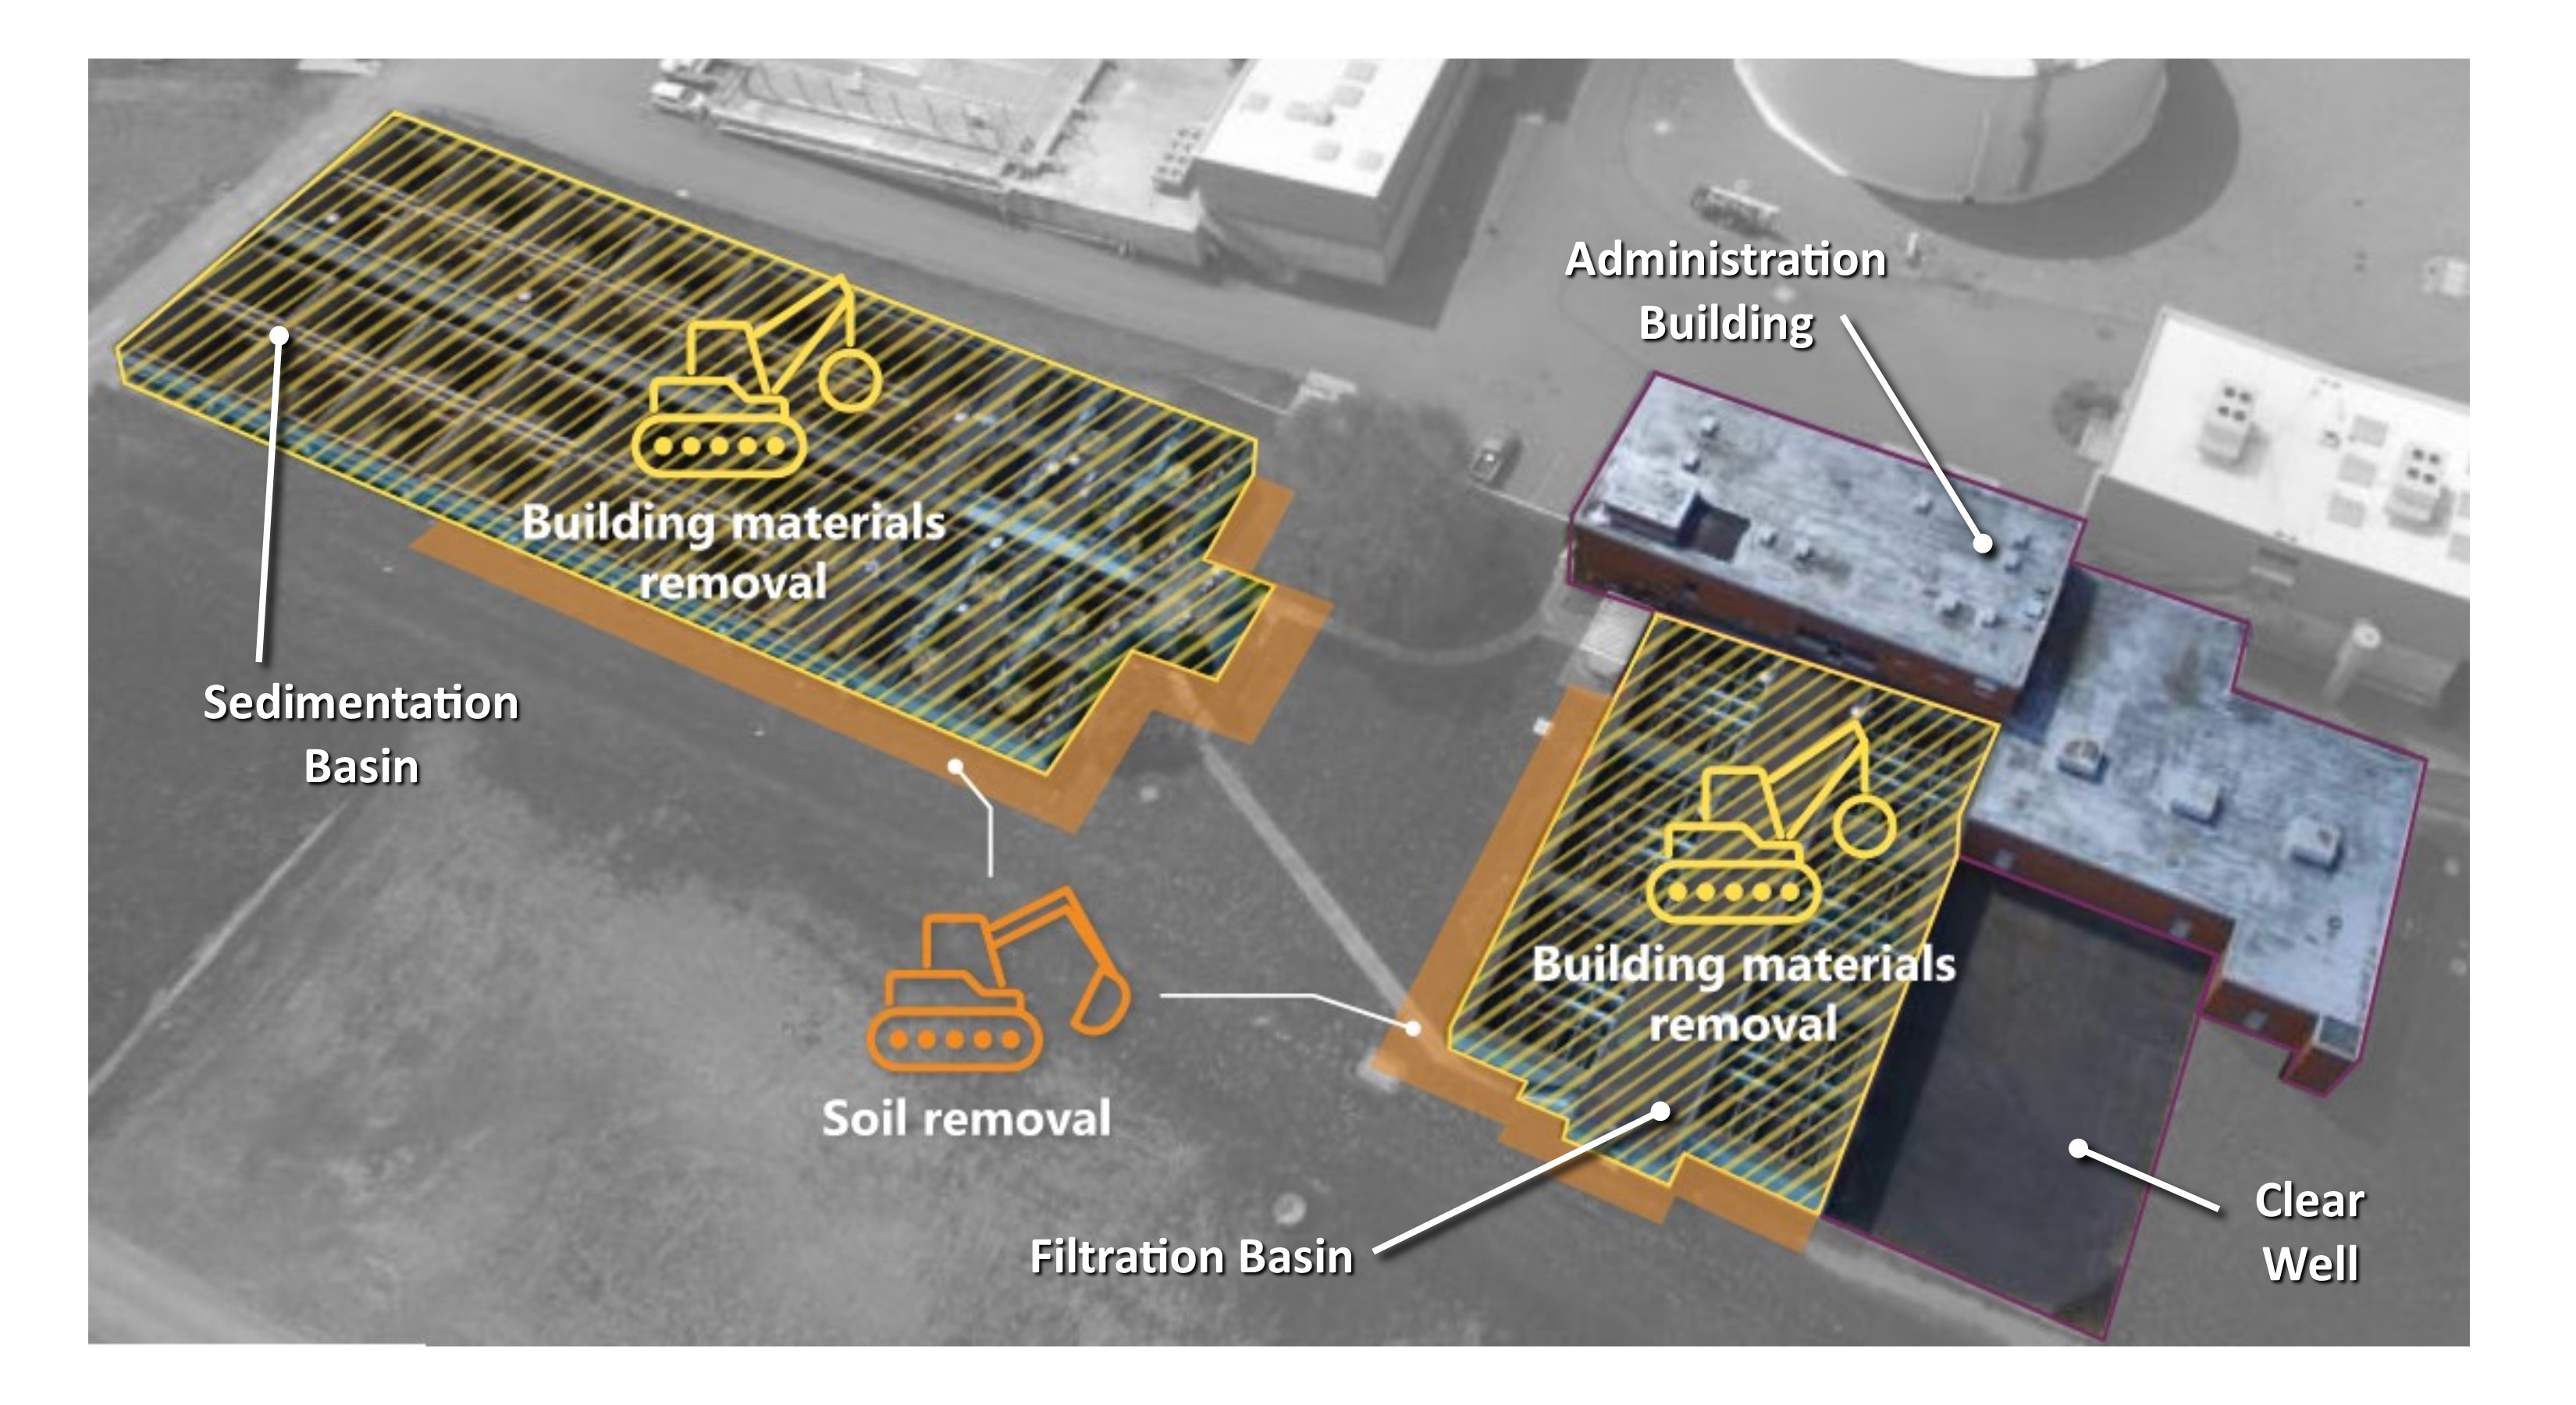 Diagram shows how demolition would include removal of contaminated outer walls and adjoining soils.